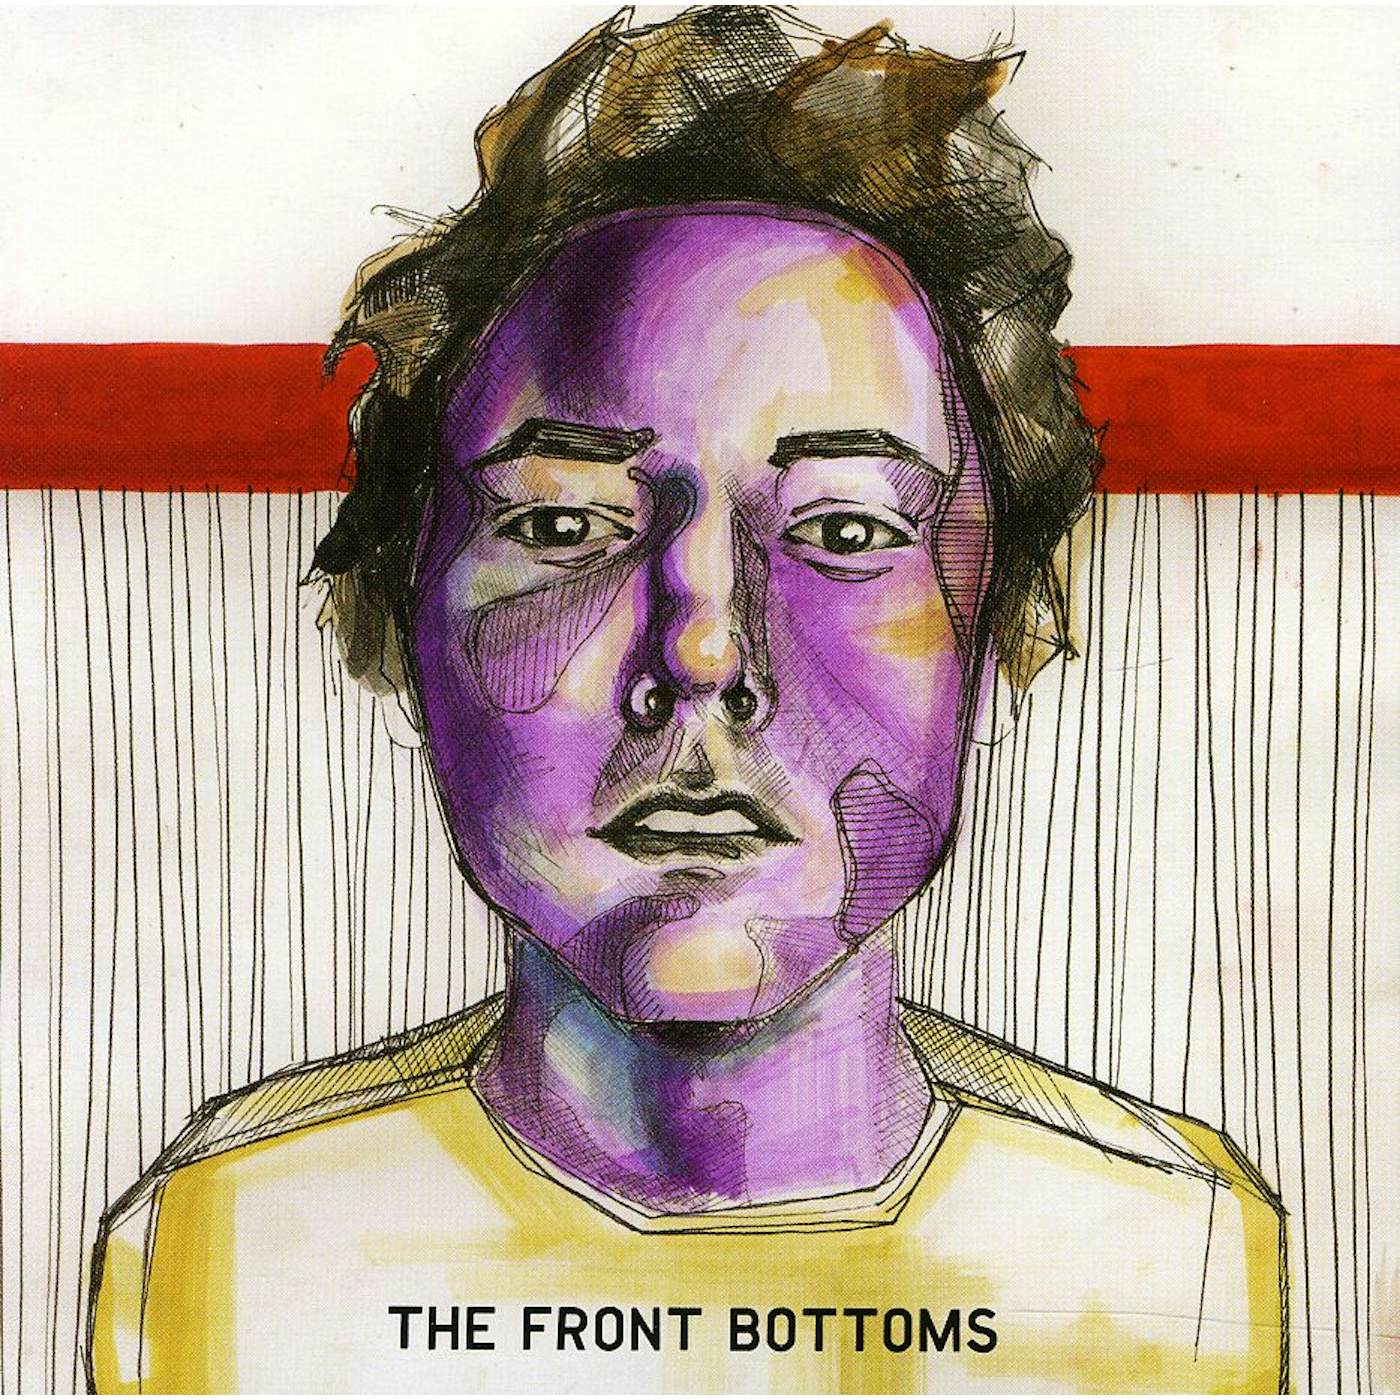 The Front Bottoms CD